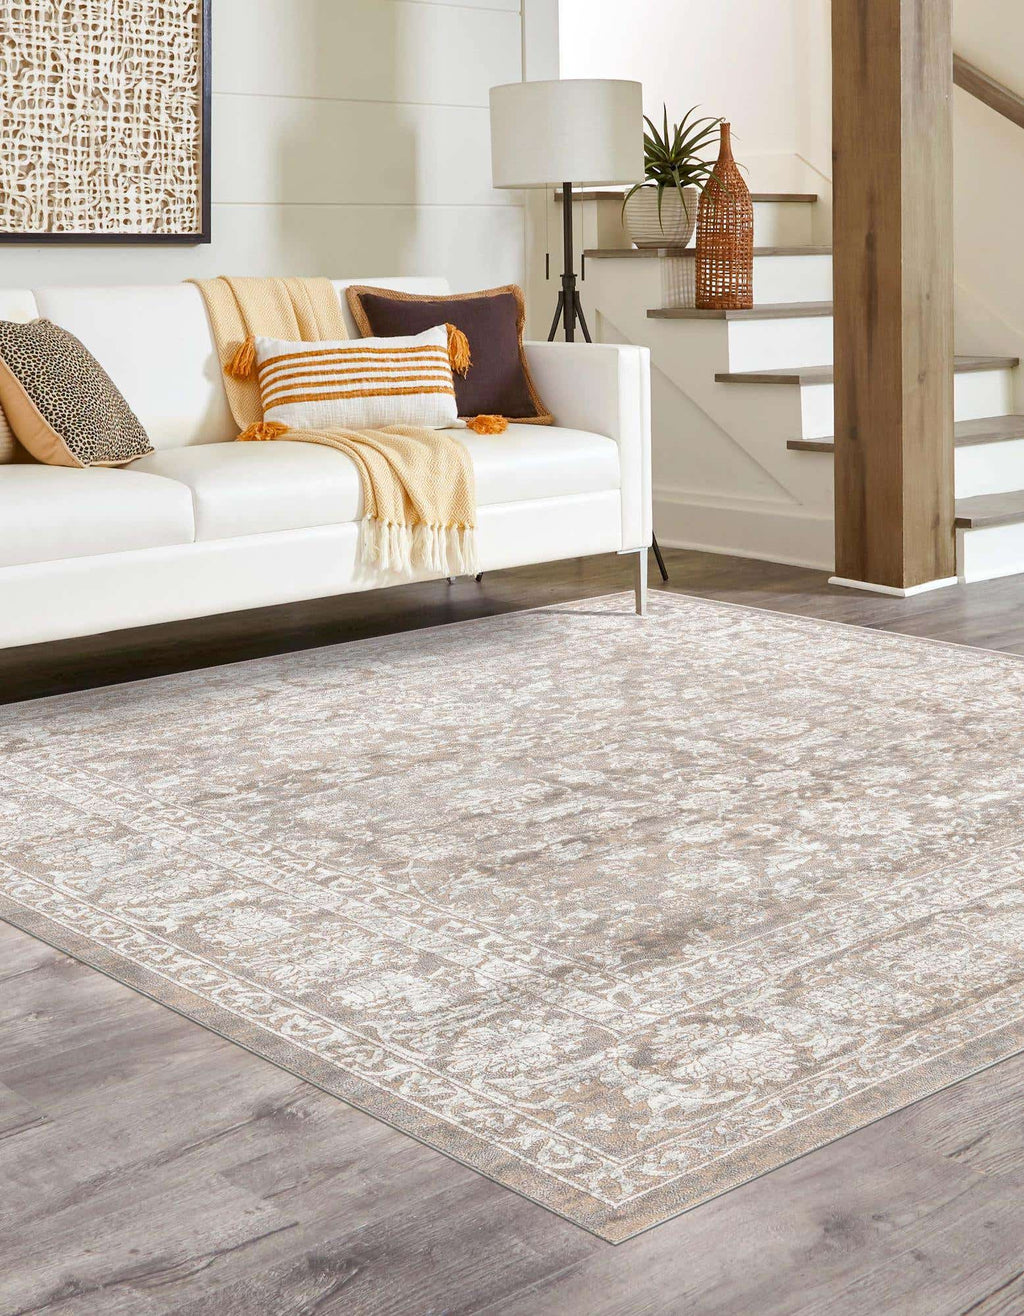 Designer Rugs - Our CENTRAL PARK rug by @gregnatale adds a